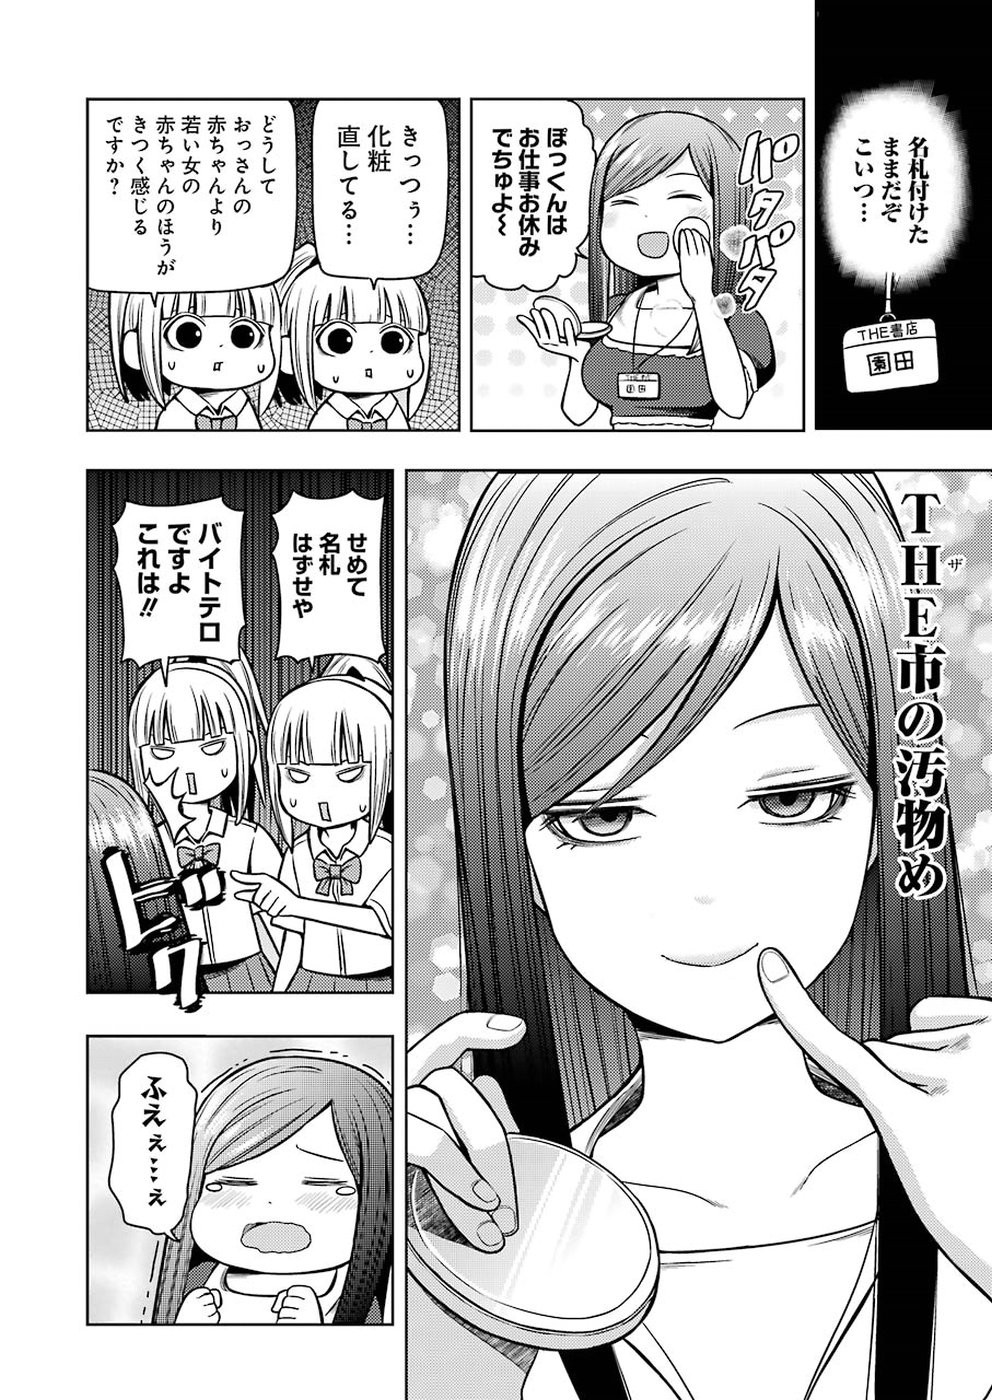 + Tic Nee-san - Chapter 186 - Page 6